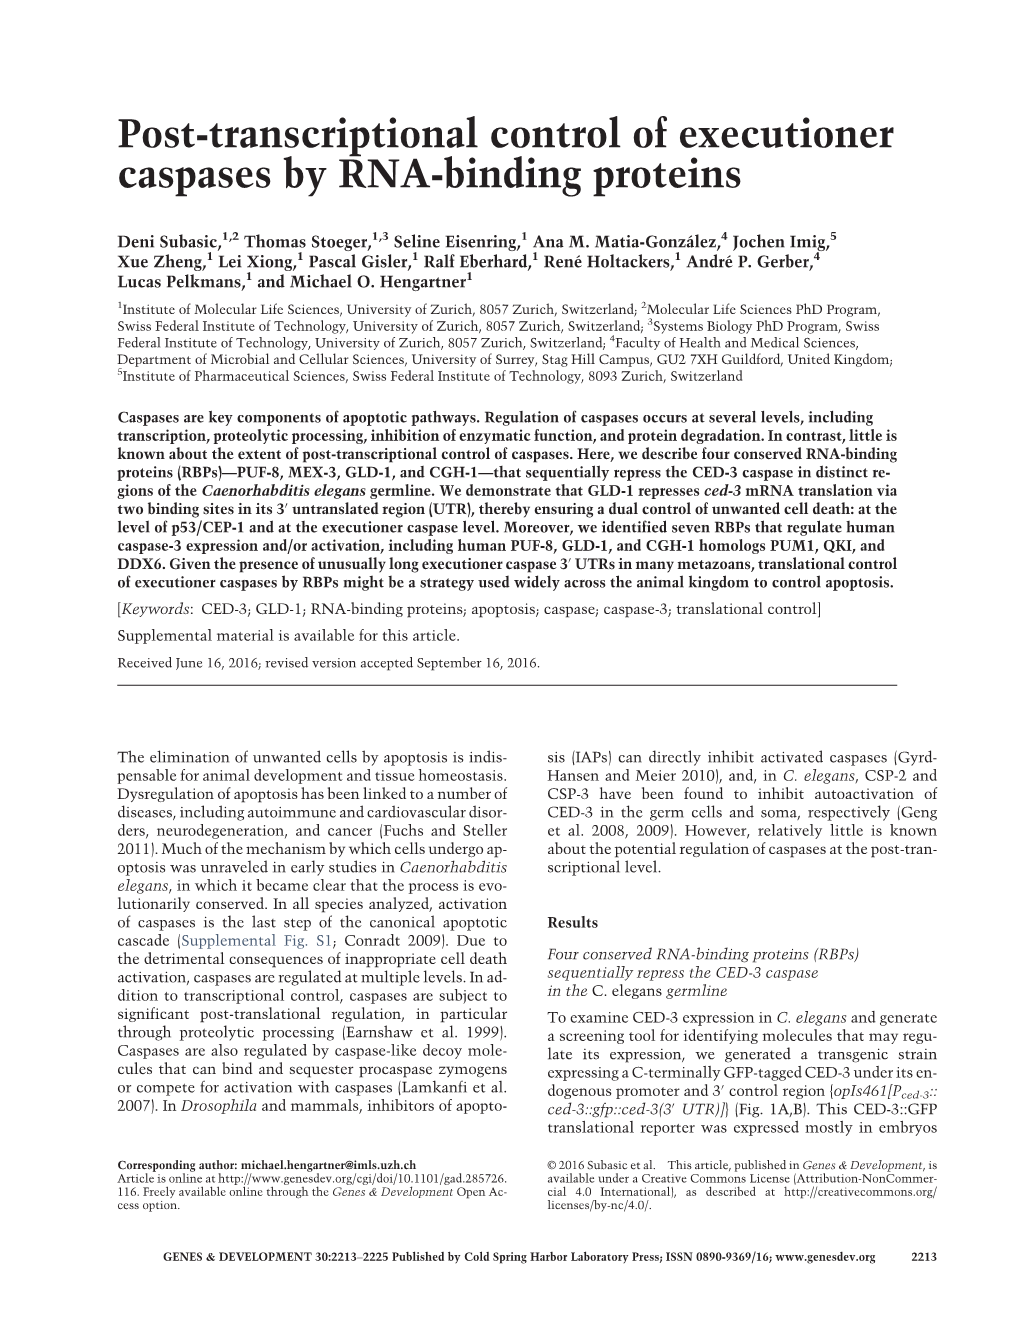 Post-Transcriptional Control of Executioner Caspases by RNA-Binding Proteins